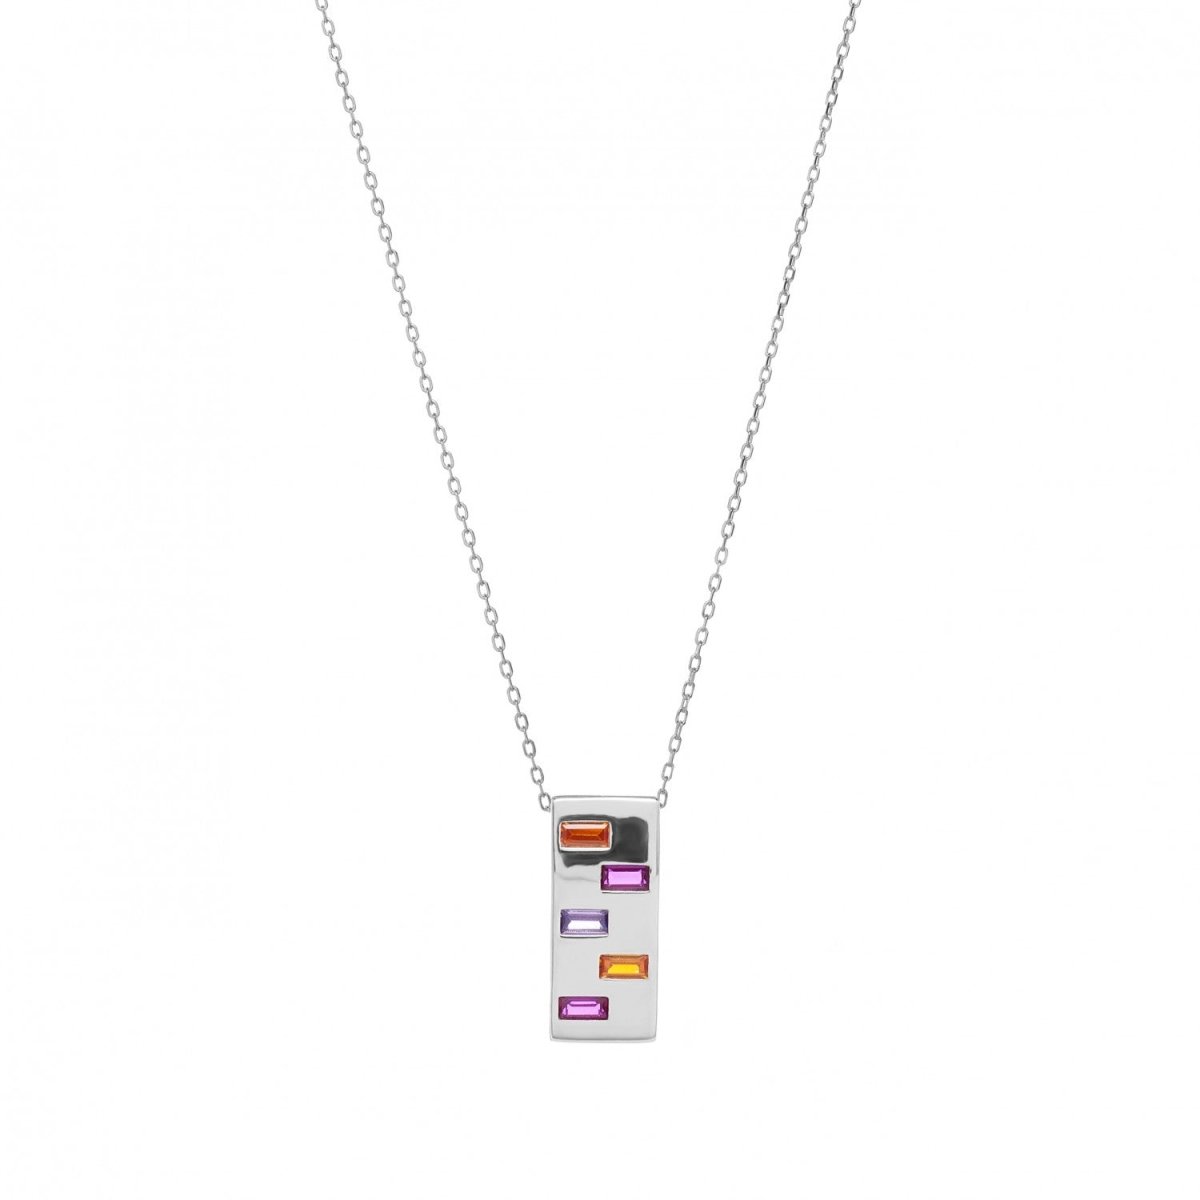 Necklace - Necklaces with stones rectangular design in shining tones